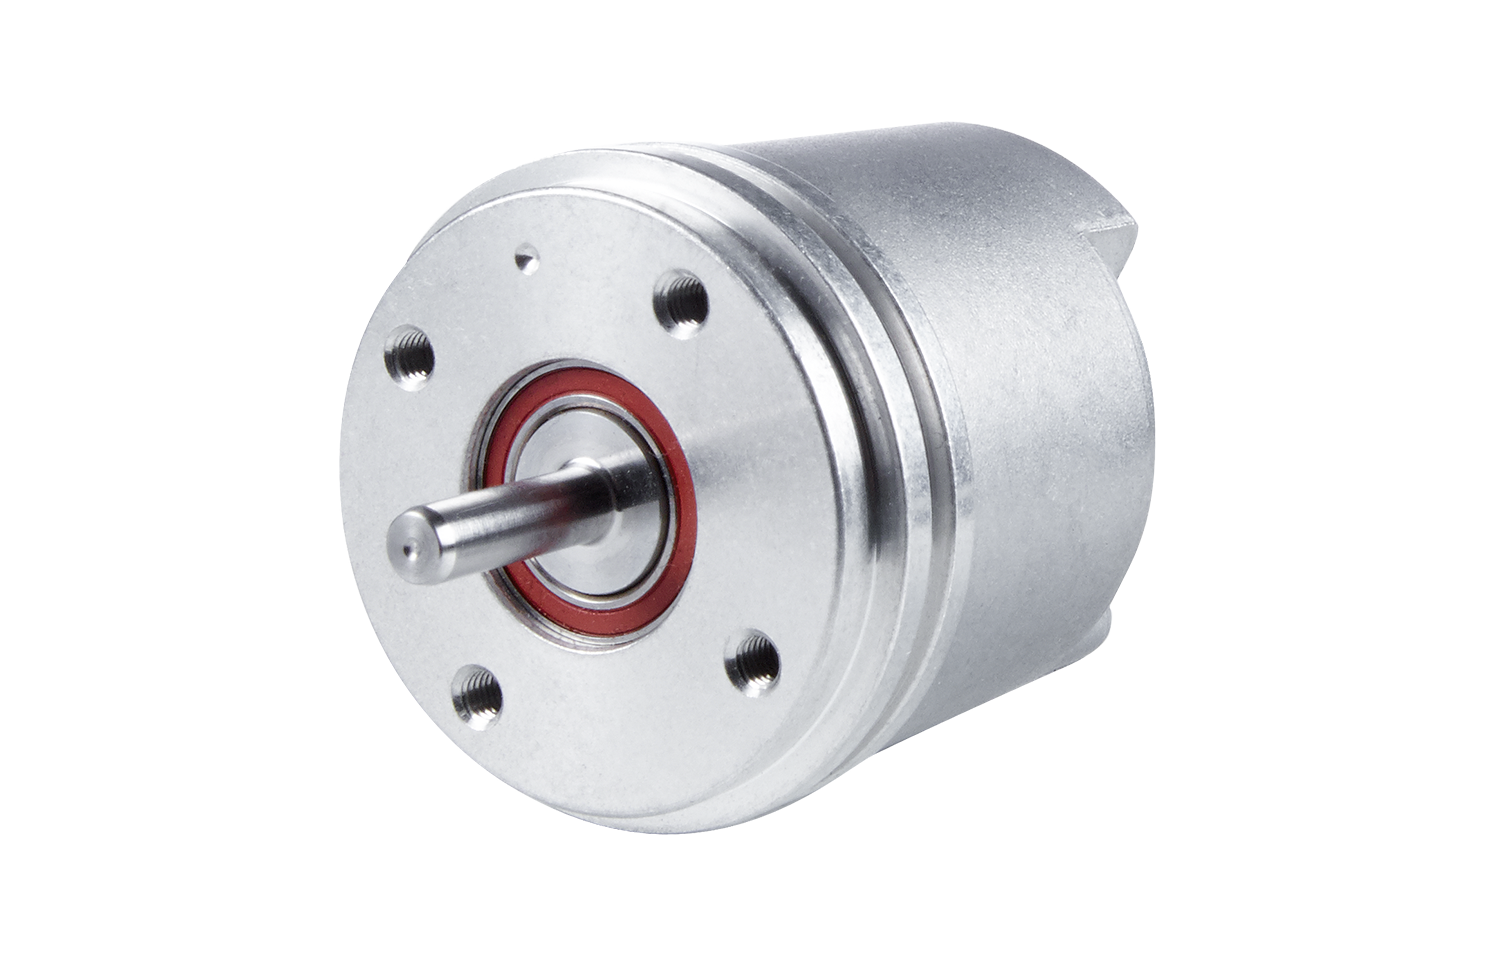 ROD 1000 rotary encoders with integral bearing